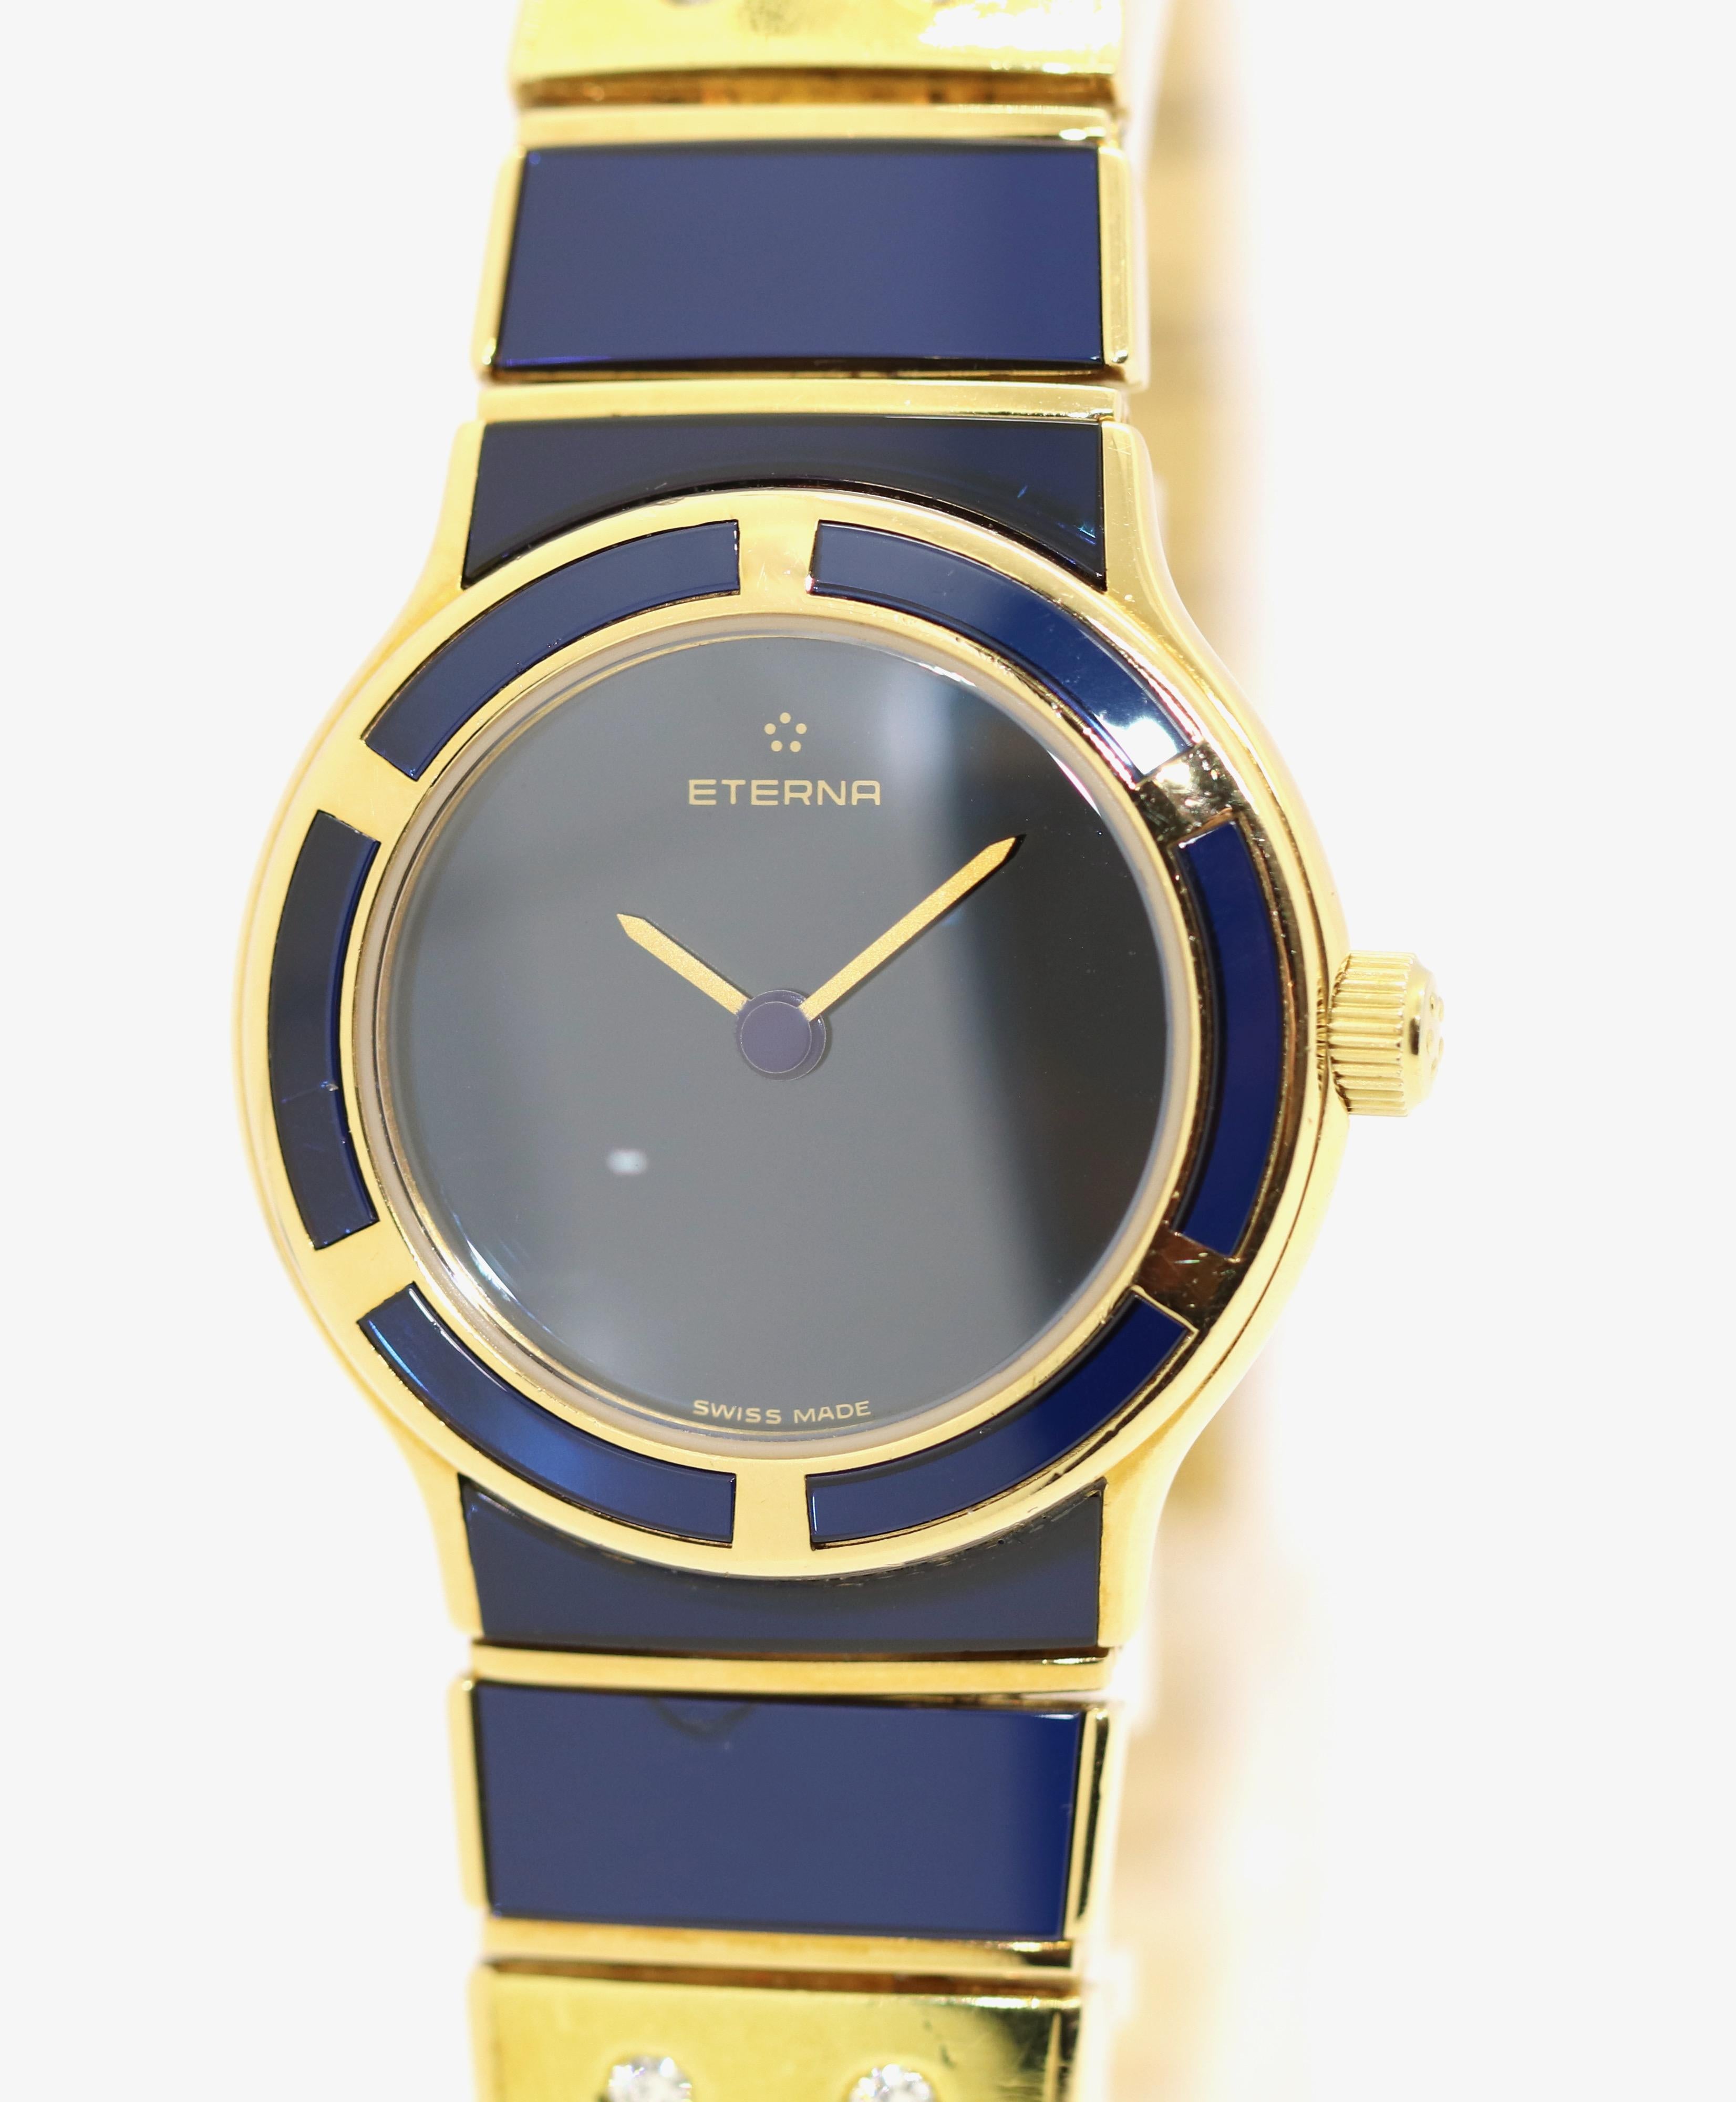 A very rare and beautiful ladies' watch. Bracelet and bezel with sapphire inlays.
Bracelet band additionally set with four diamonds.
Case and Strap 18 Karat solid Gold.

Special feature: This watch has the unique serial number 007.

Quartz movement.